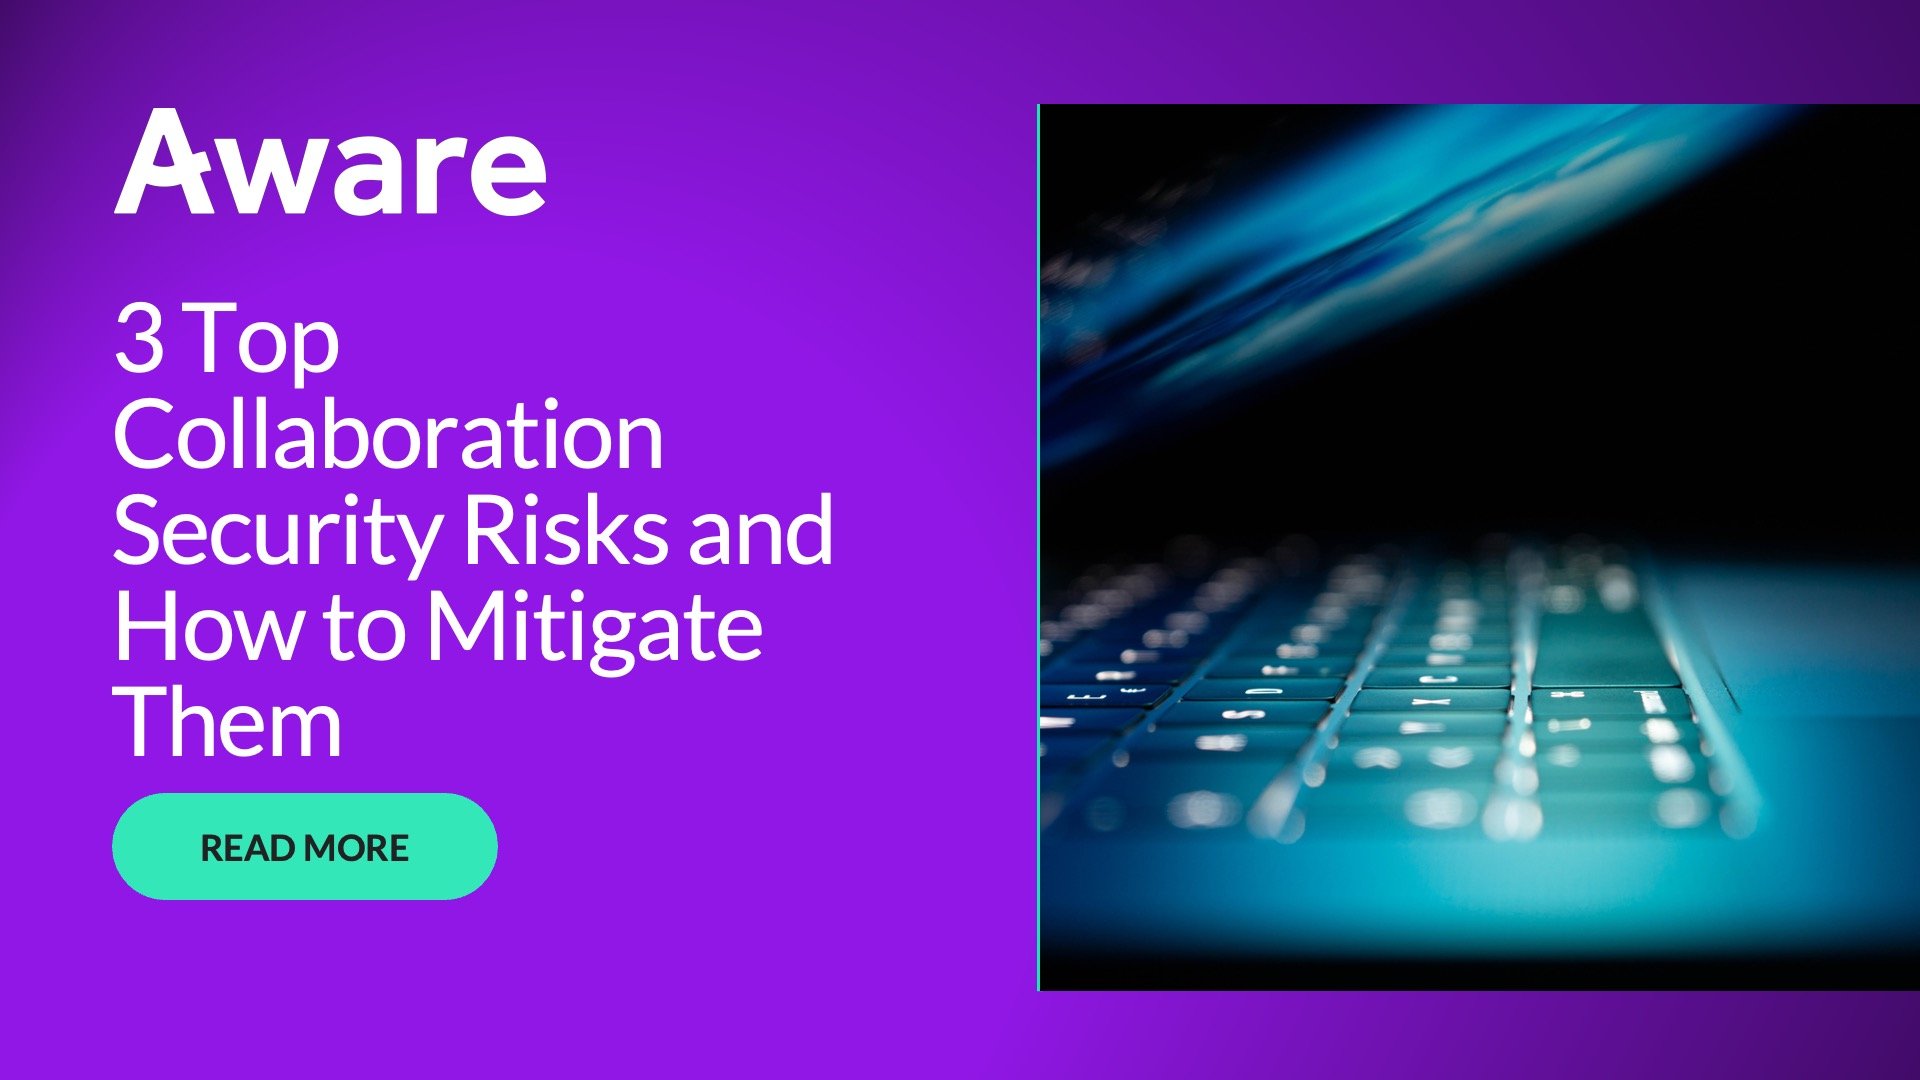 3 Top Collaboration Security Risks and How to Mitigate Them